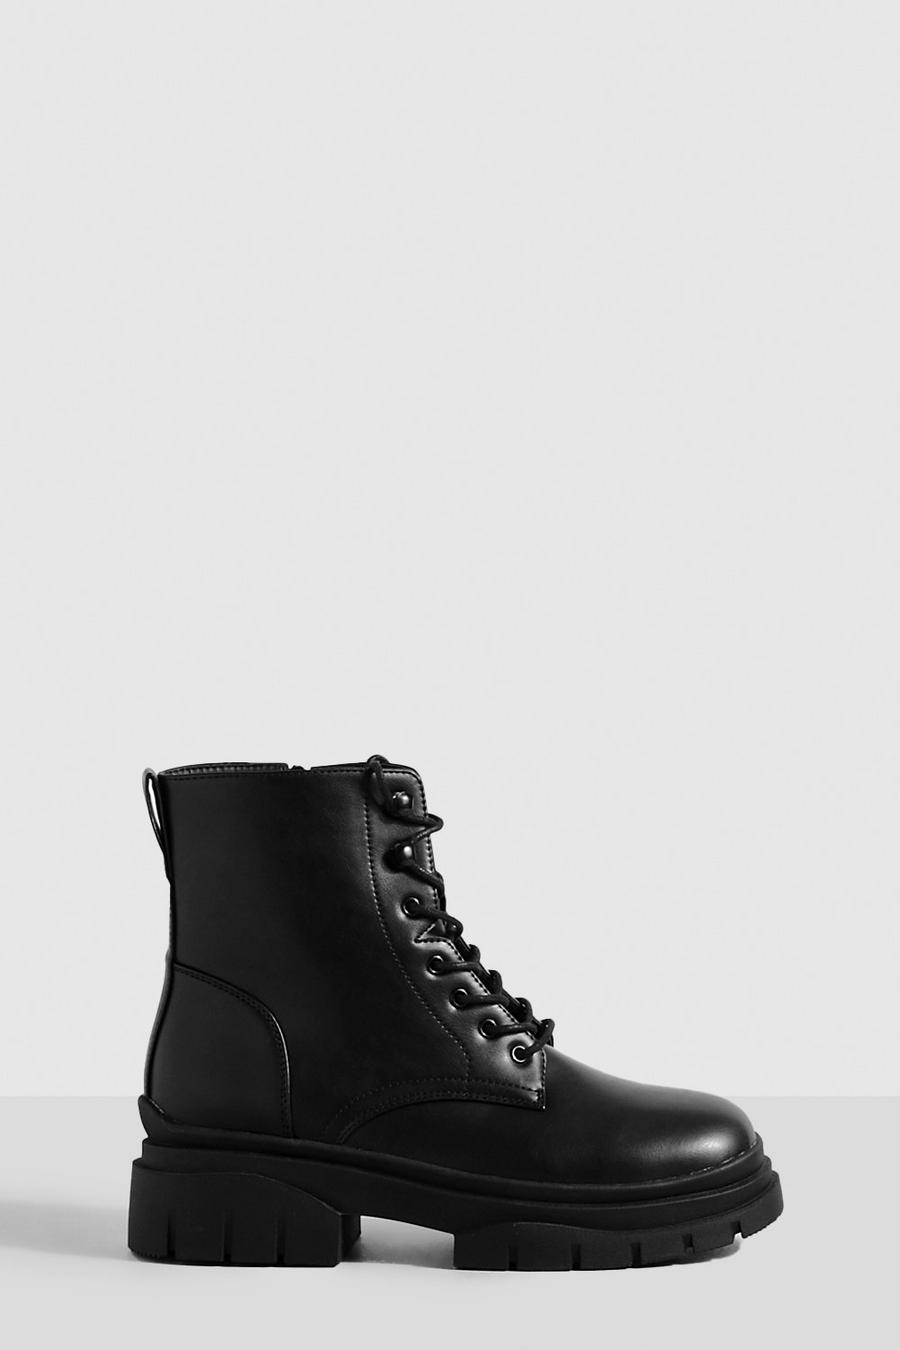 Wide Fit Wave Sole Lace Up Biker Boots | Boohoo UK